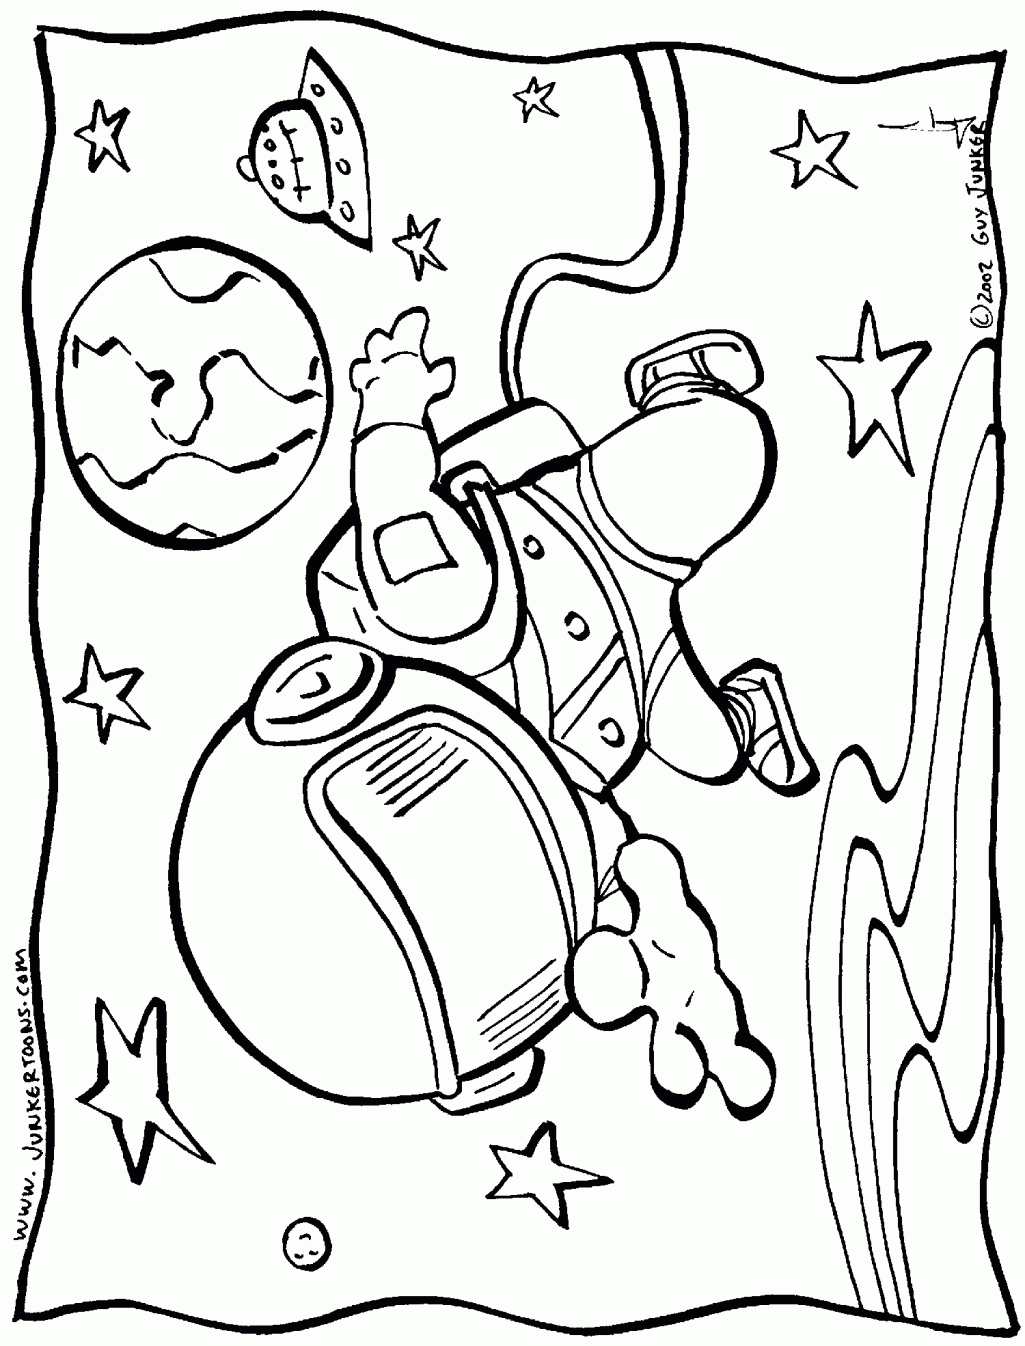 coloring sheets for astronauts - Clip Art Library